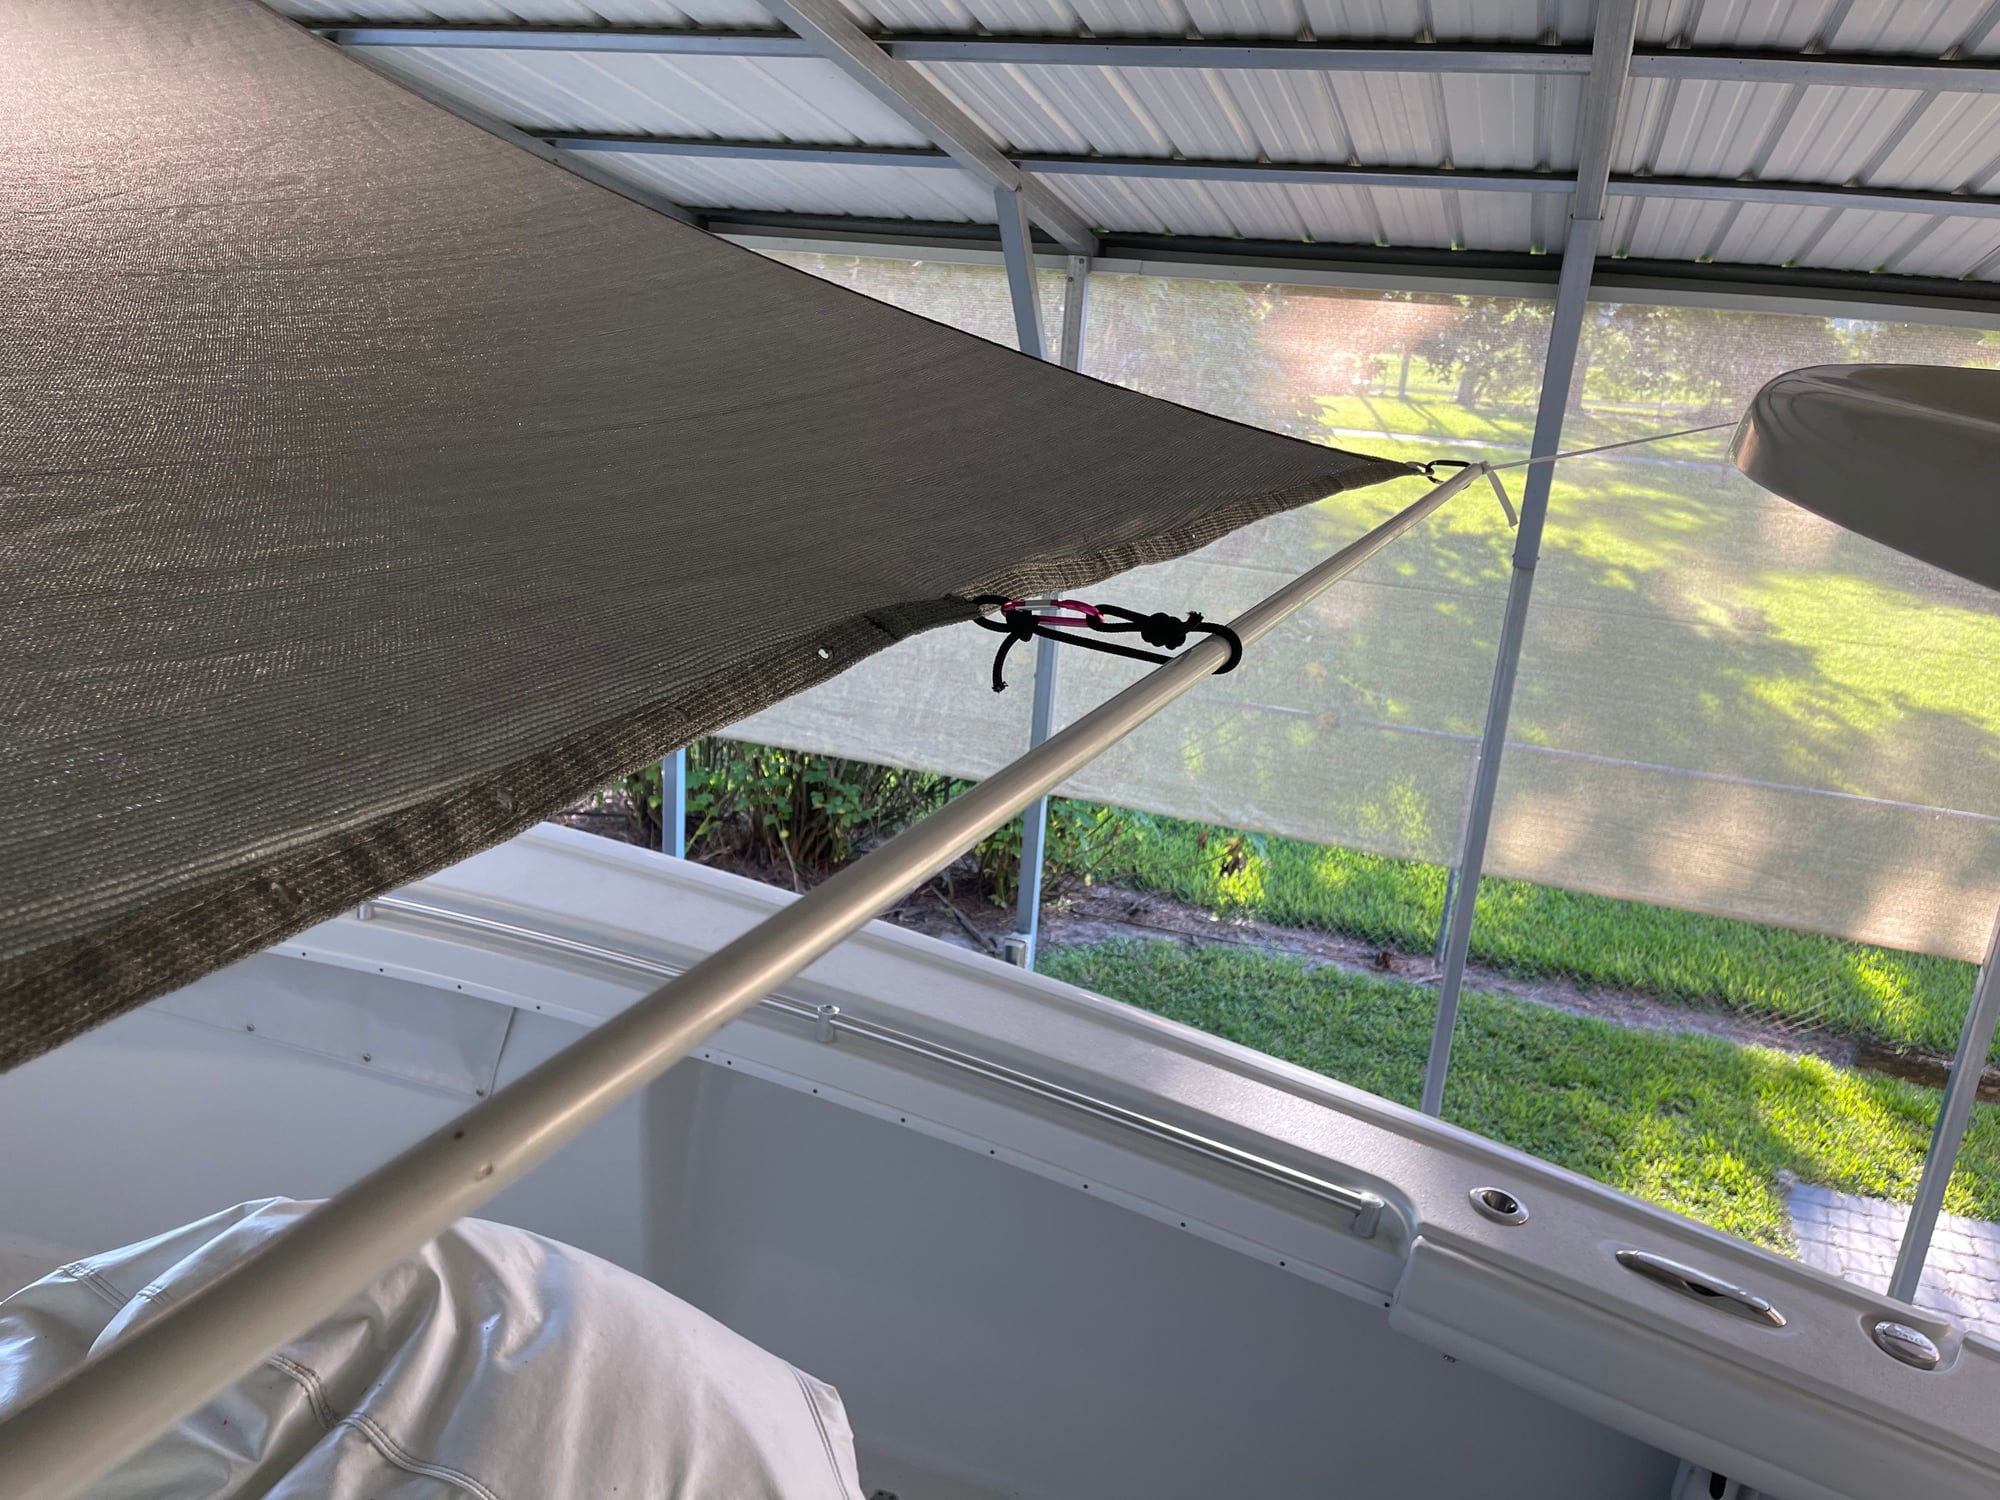 Rod Holder umbrella for shade? - The Hull Truth - Boating and Fishing Forum